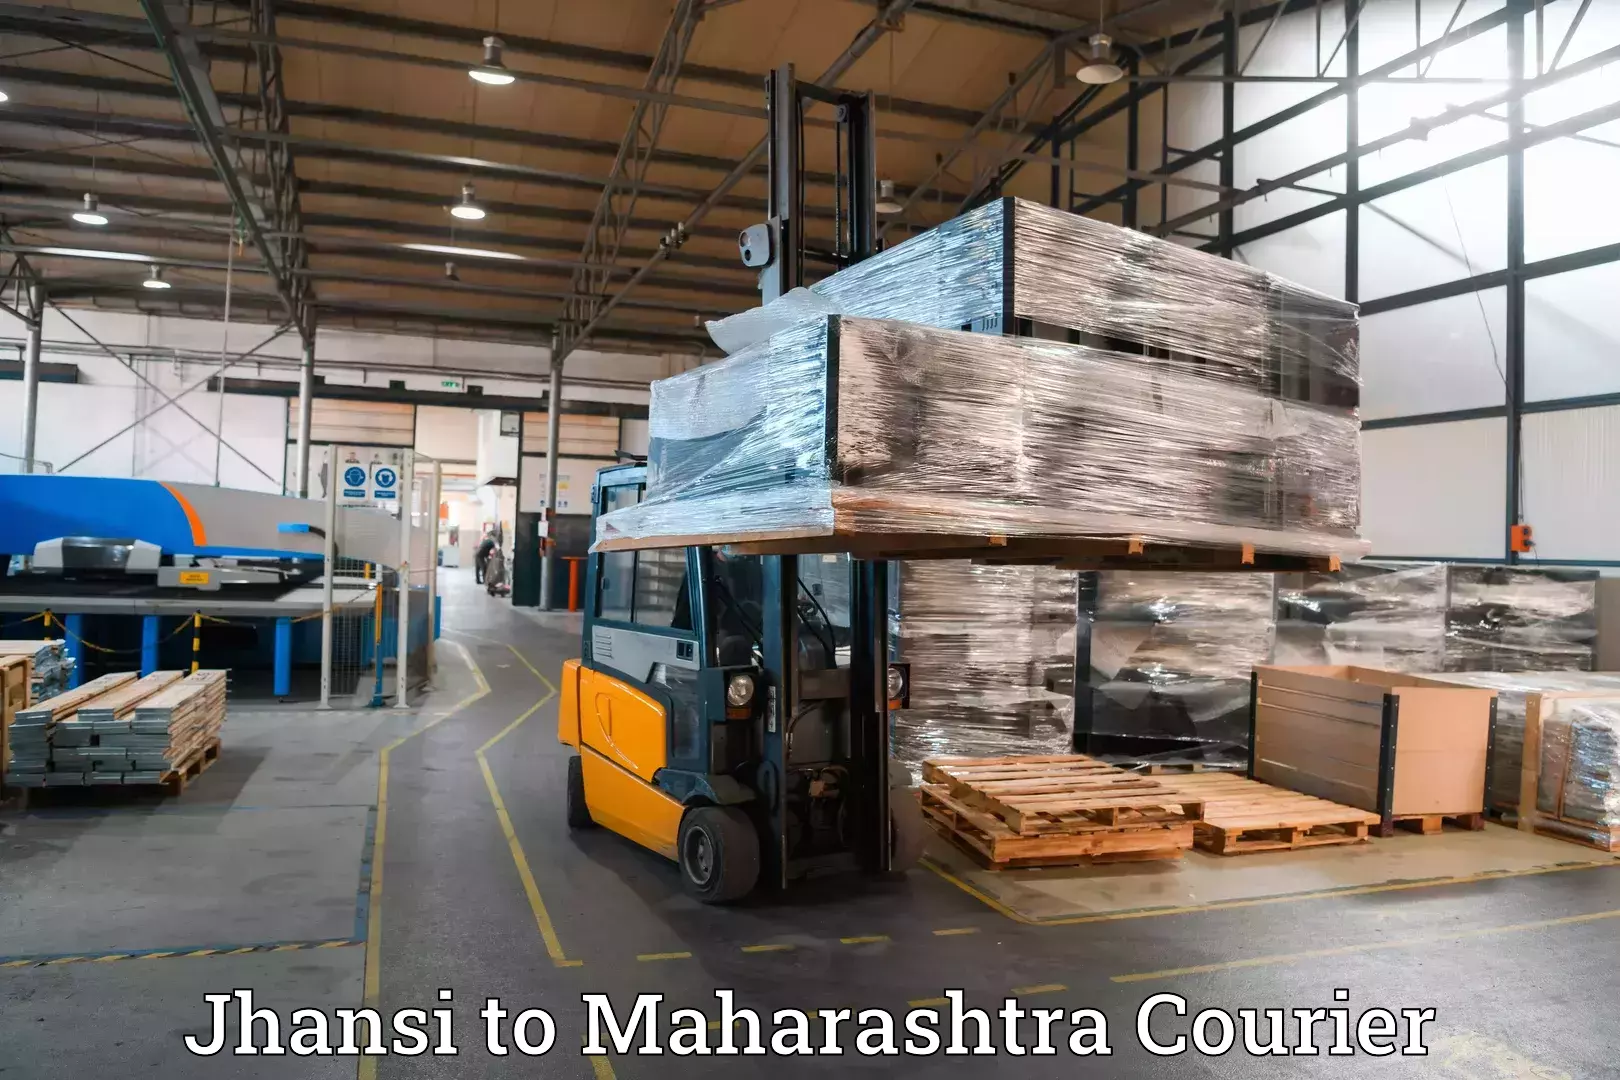 Baggage shipping schedule in Jhansi to Maharashtra